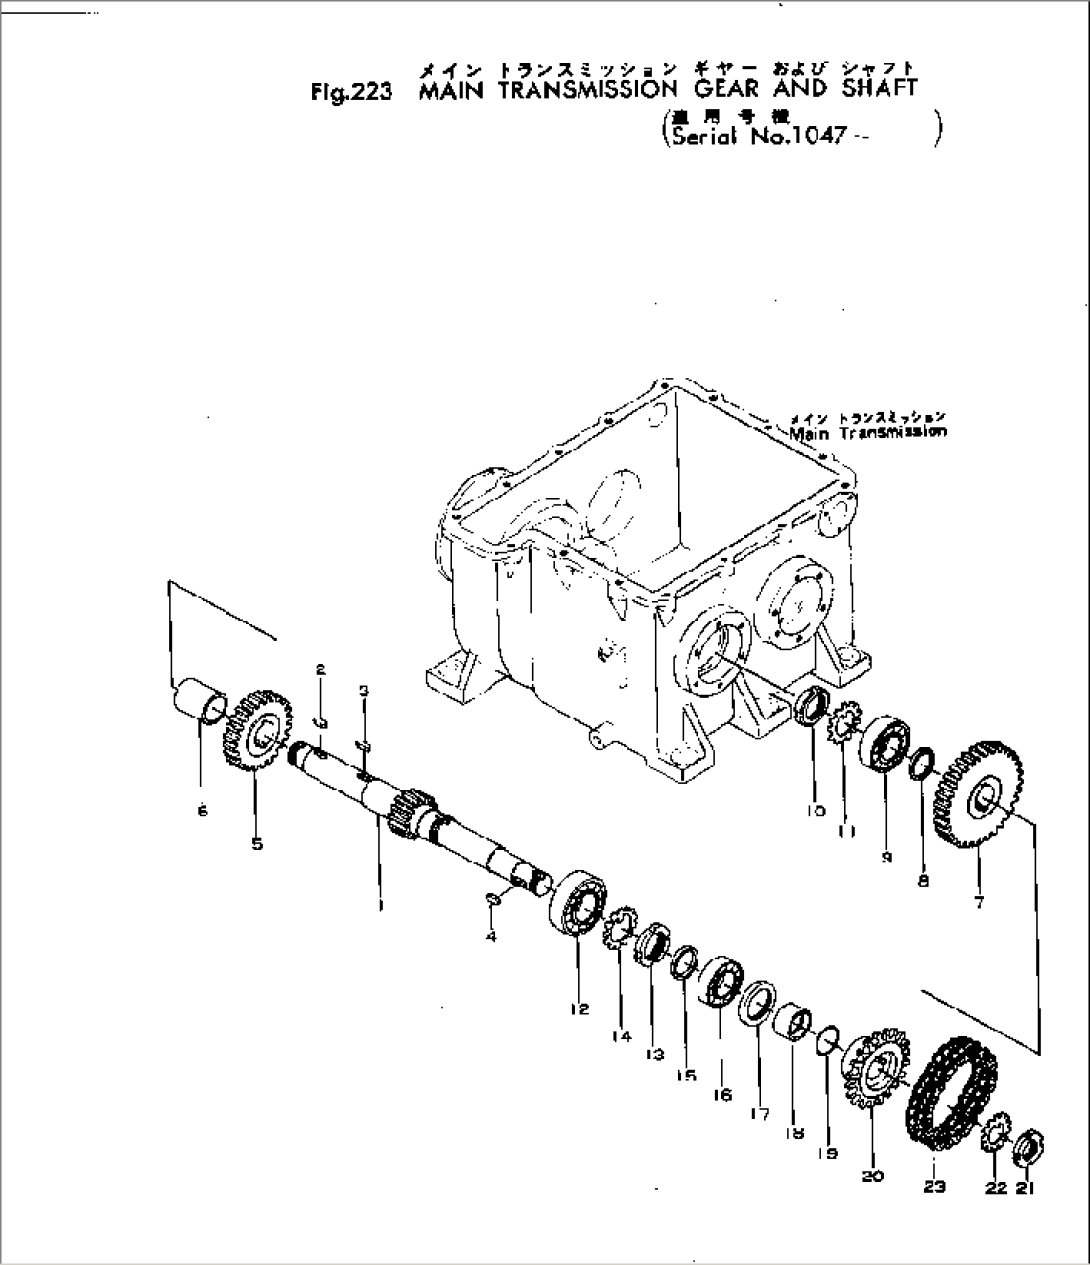 MAIN TRANSMISSION GEAR AND SHAFT